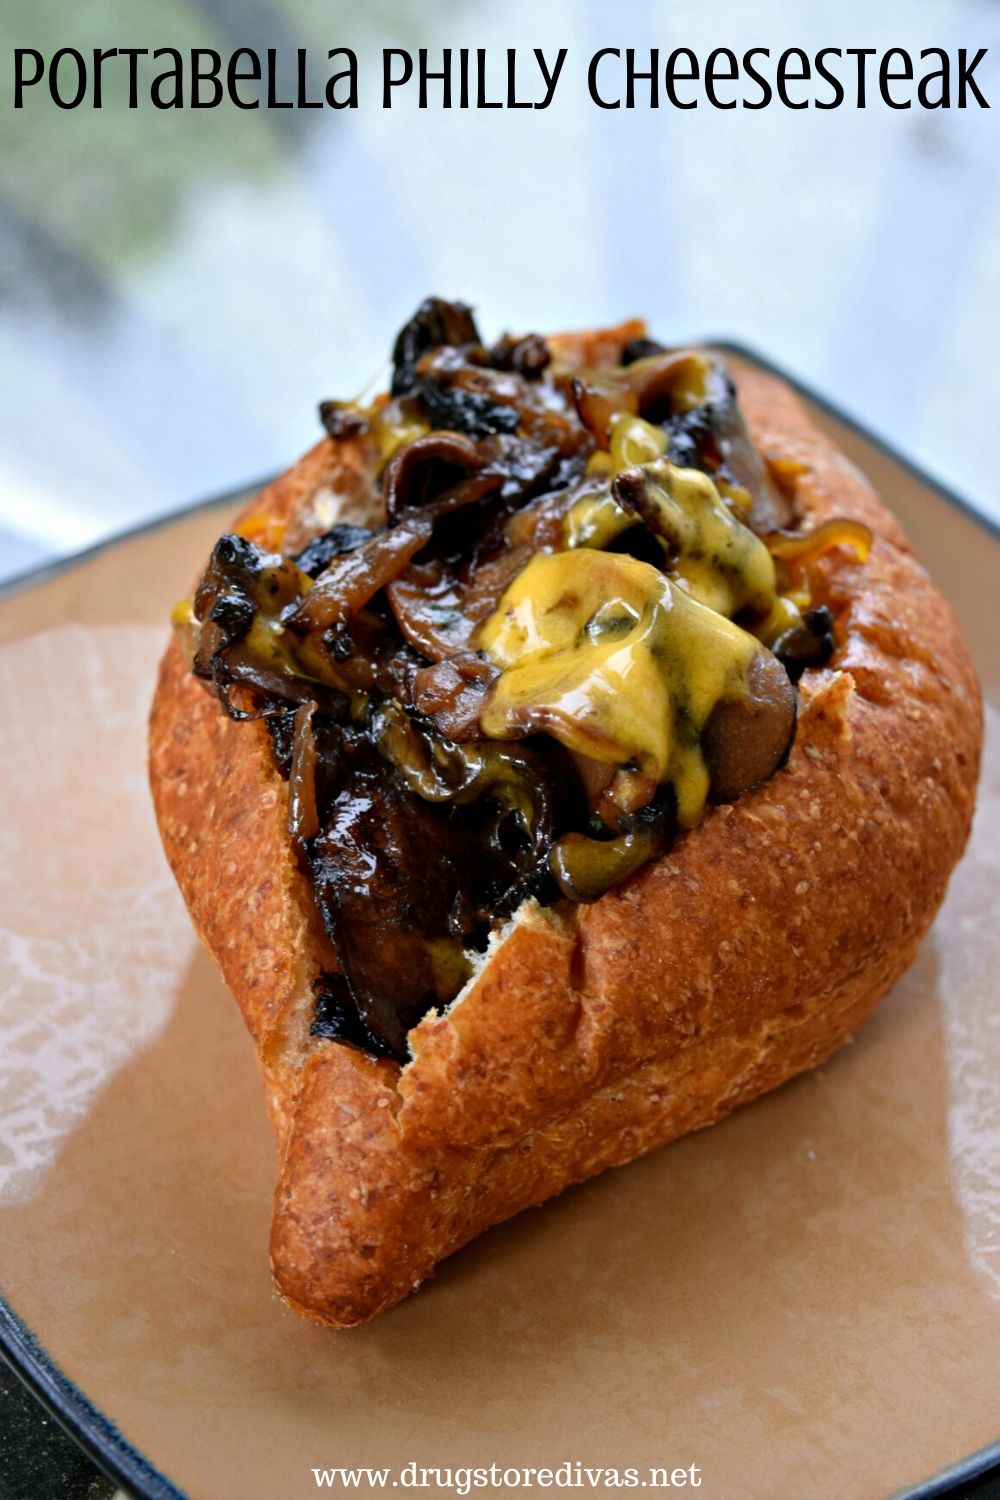 Looking for a Meatless Monday meal? Try these Portabella Philly Cheesesteaks. You won't even miss the meat.